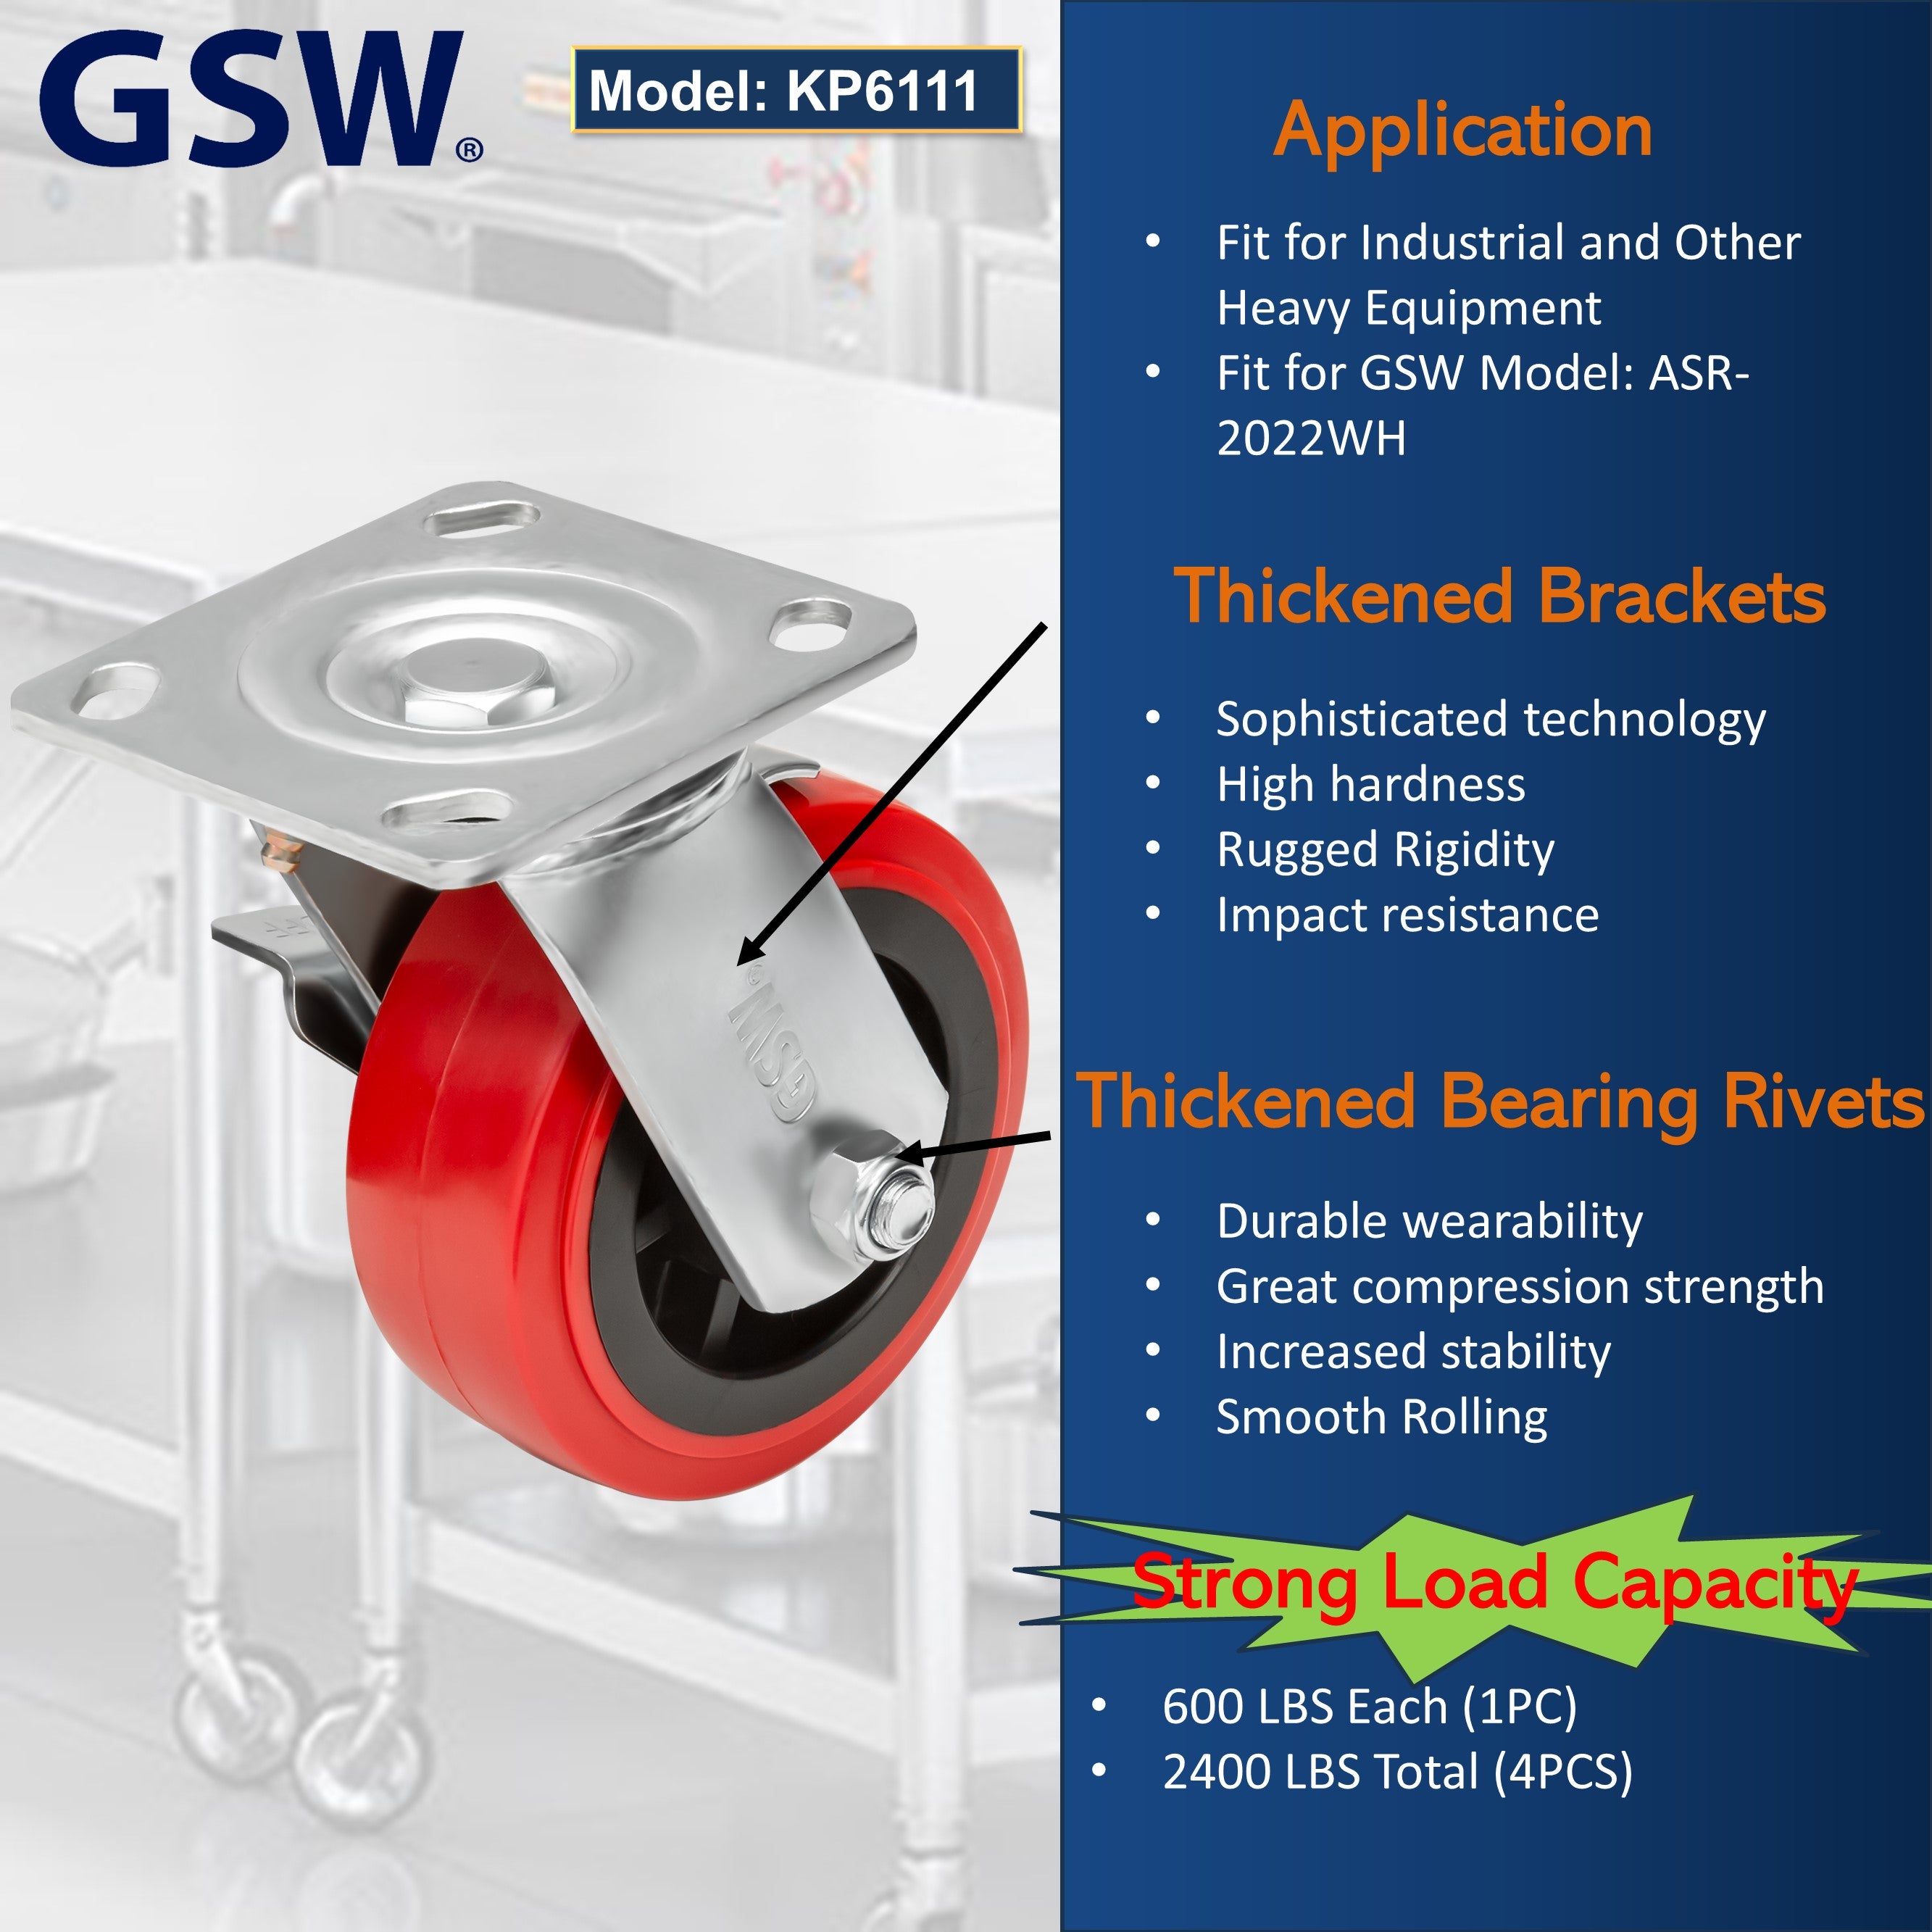 GSW 5" Industrial Casters - Heavy Duty Casters, Set of 4 Plate Casters with Loading Capacity of 2400 Lbs, Use for Heavy Equipment, Carts, and Workbench (2 Swivels and 2 Brakes)